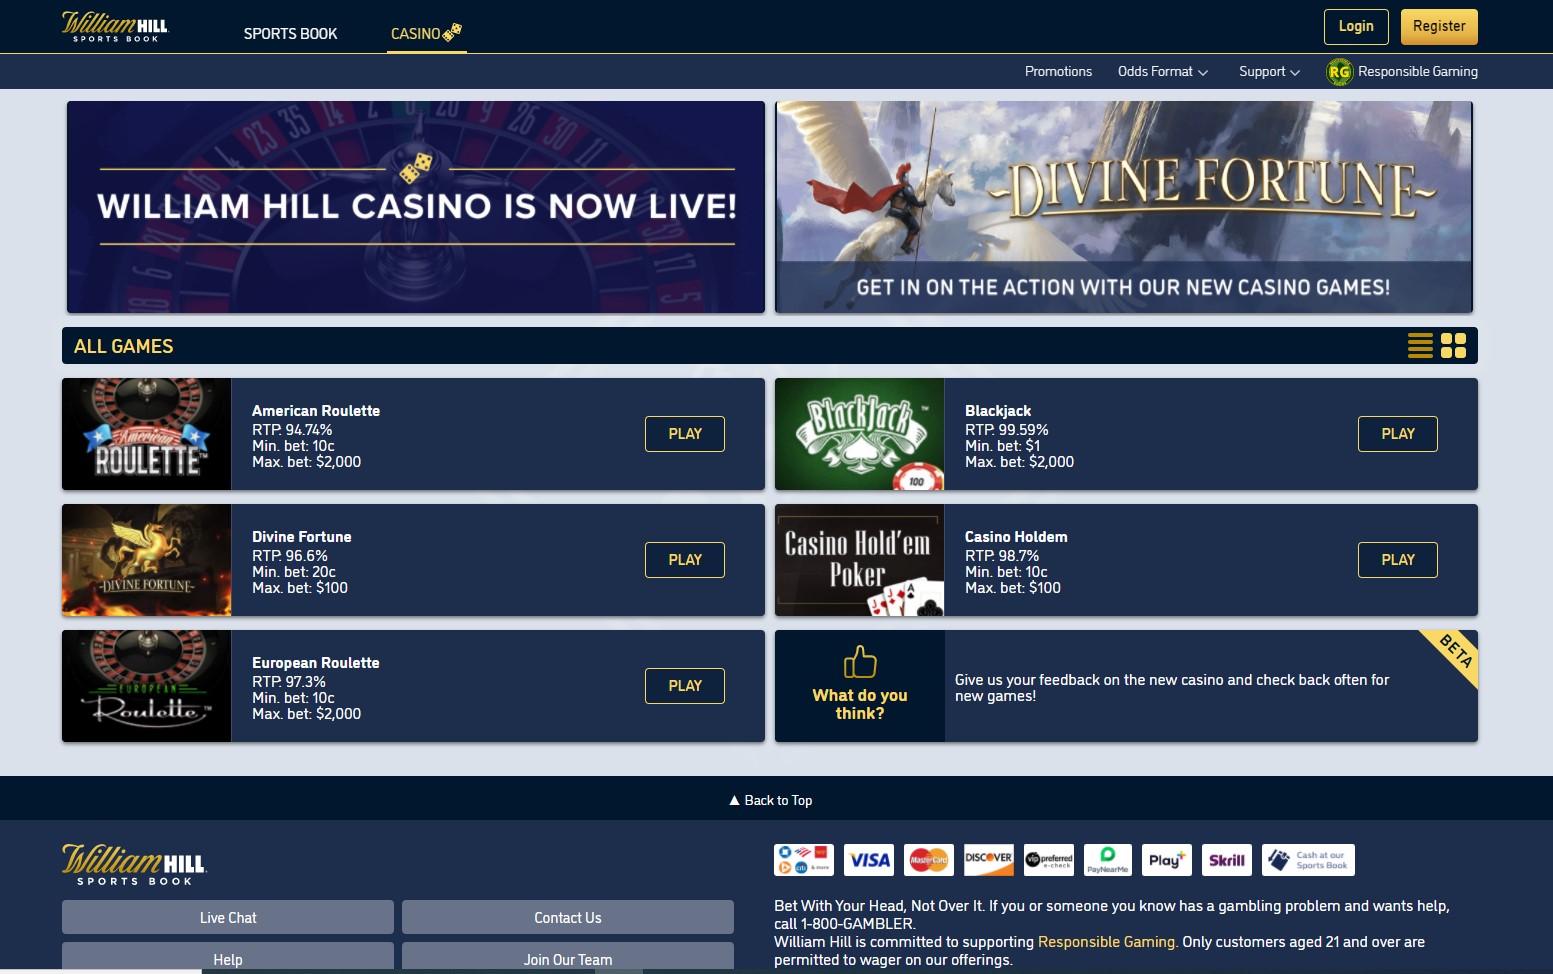 william hill sportsbook review